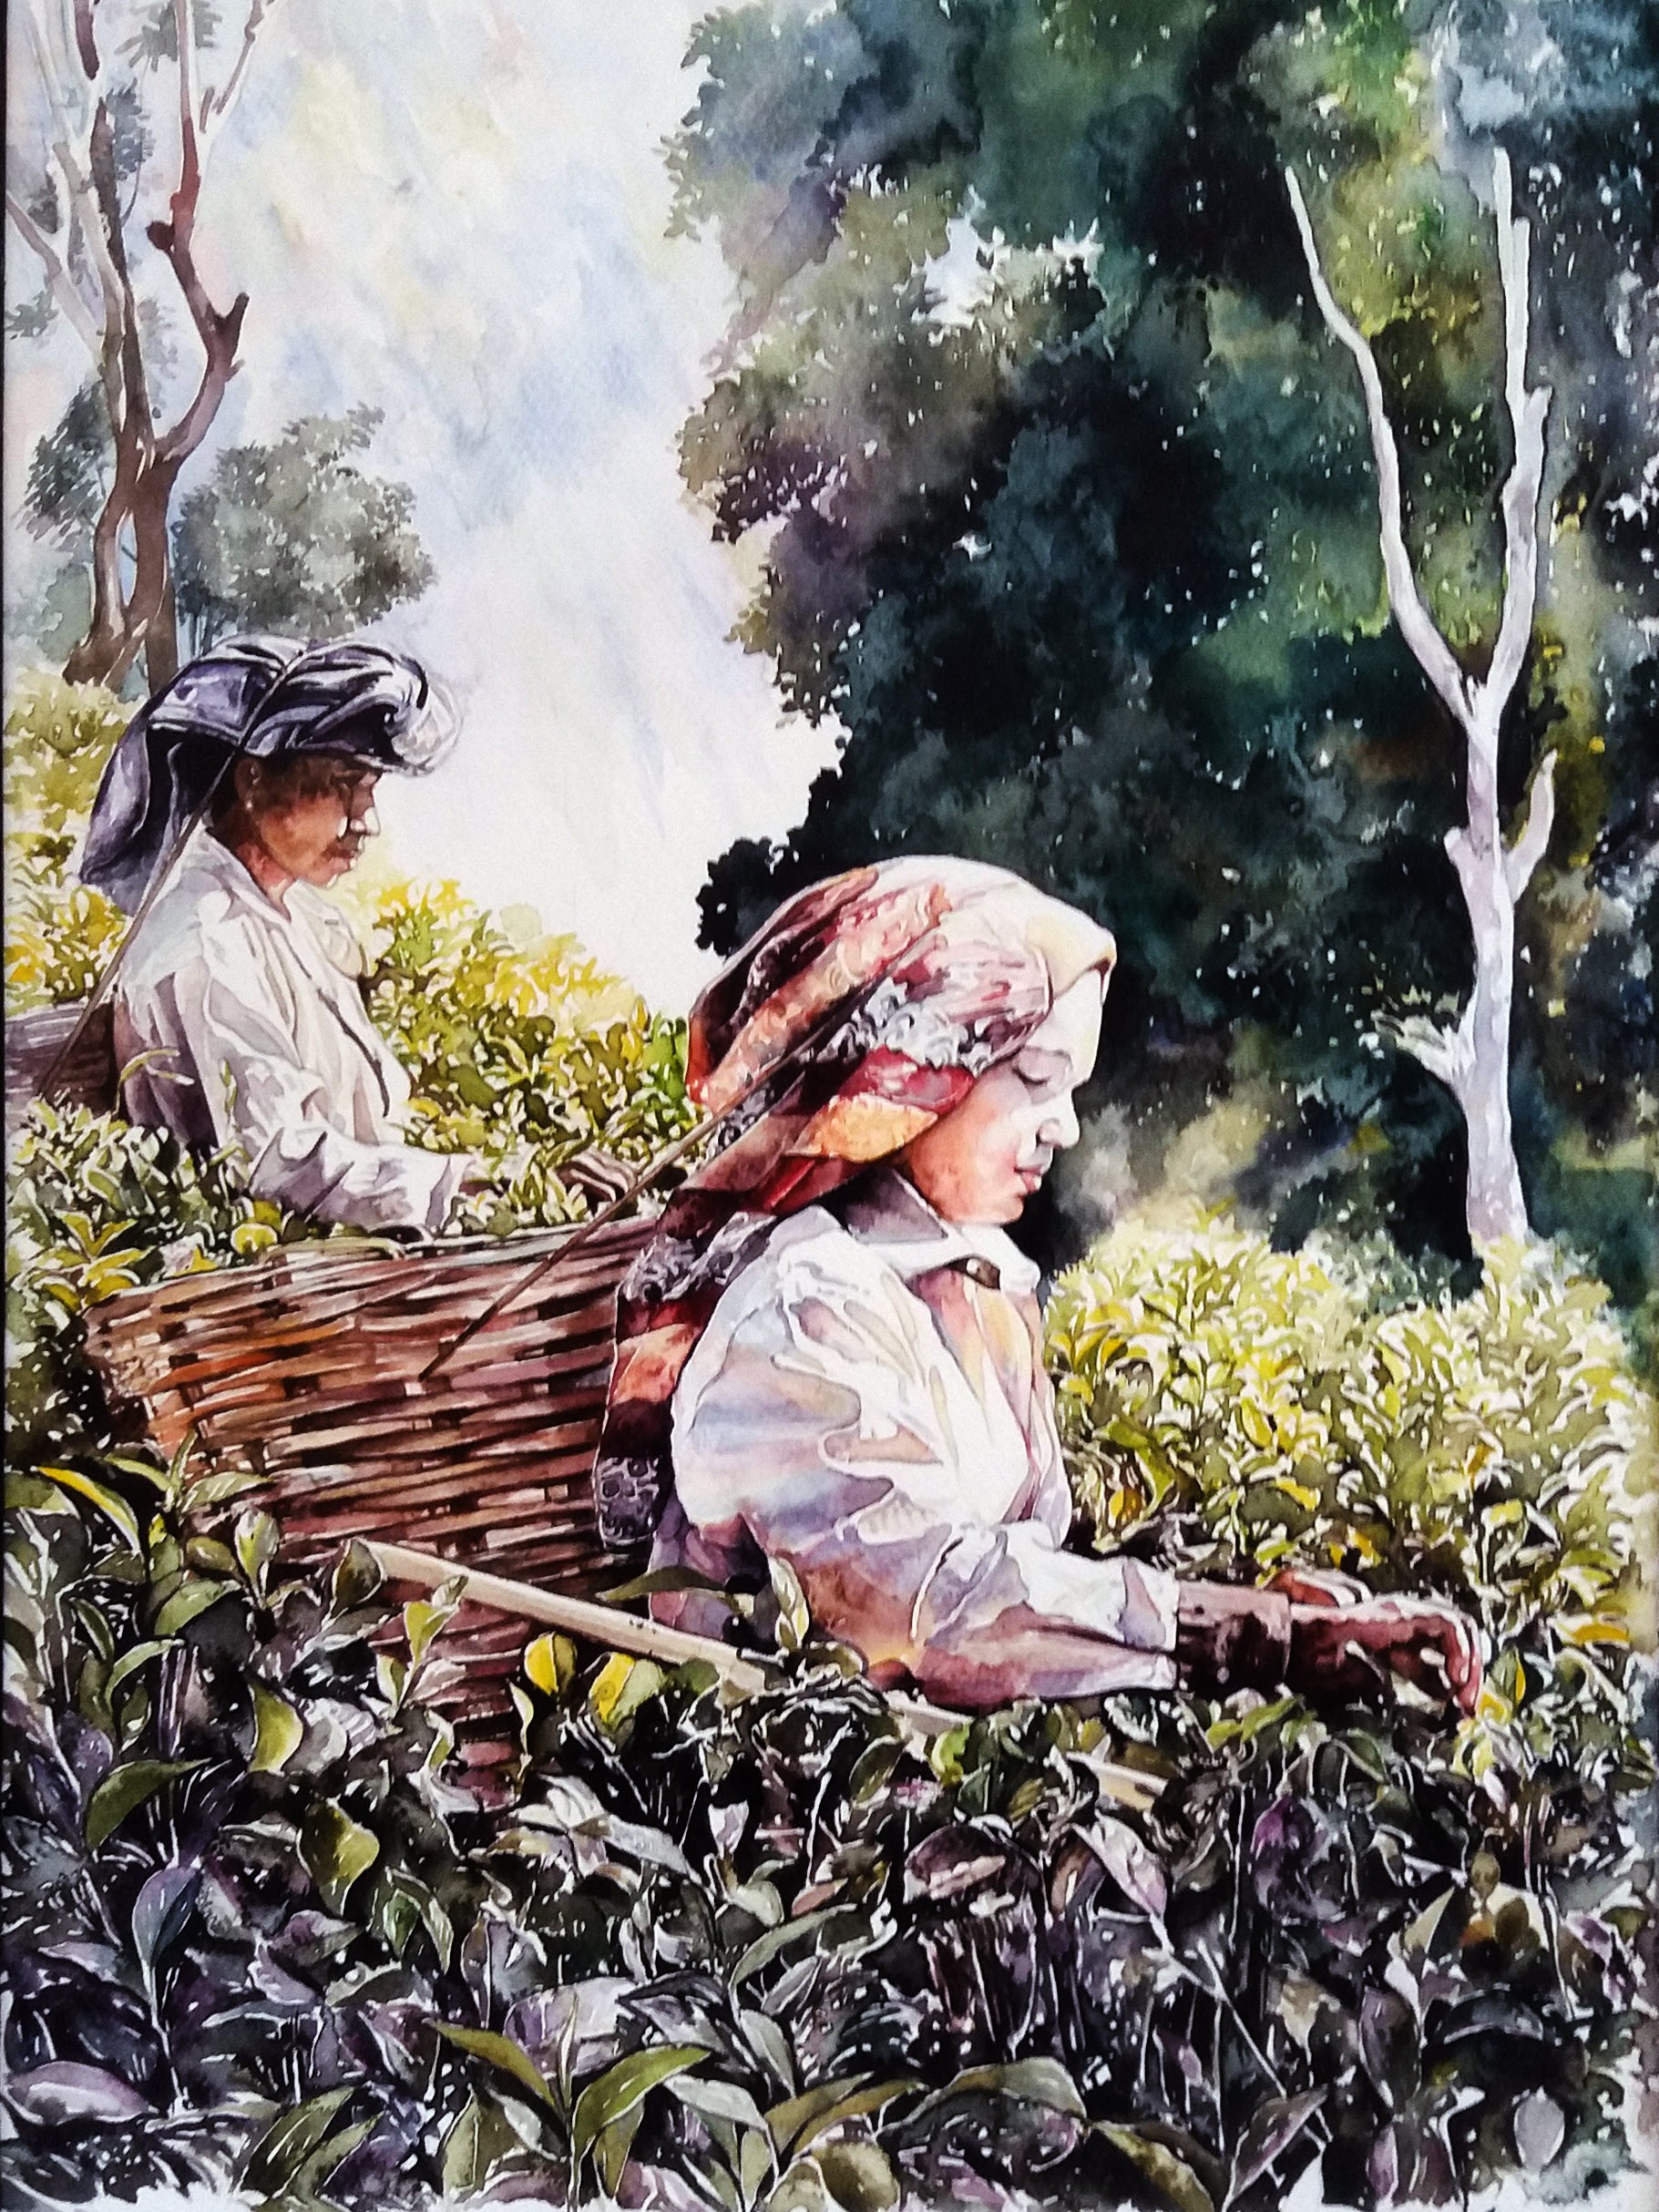 Women picking tea leaves by Ayoma Wijerathne